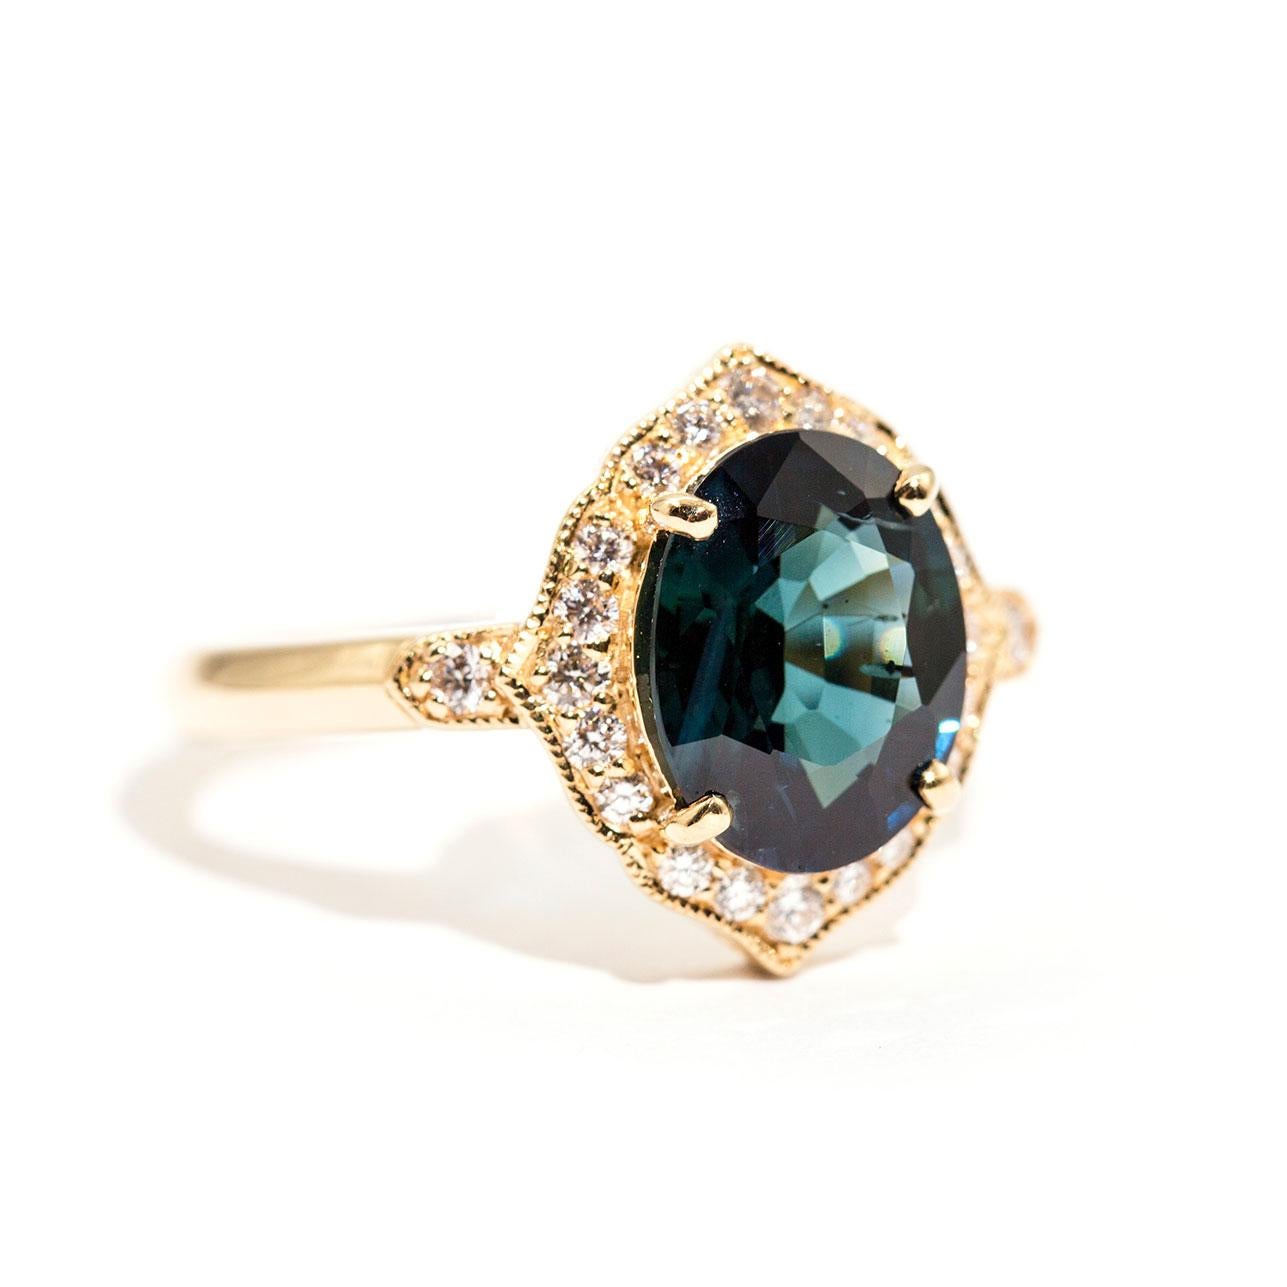 Forged in 18 carat yellow gold is this gorgeous ring that features the most lovely 2.87 carat oval cut natural sapphire of an alluring deep teal colour, with flashes of deep blue, and is encompassed with a sparkling border of round brilliant cut